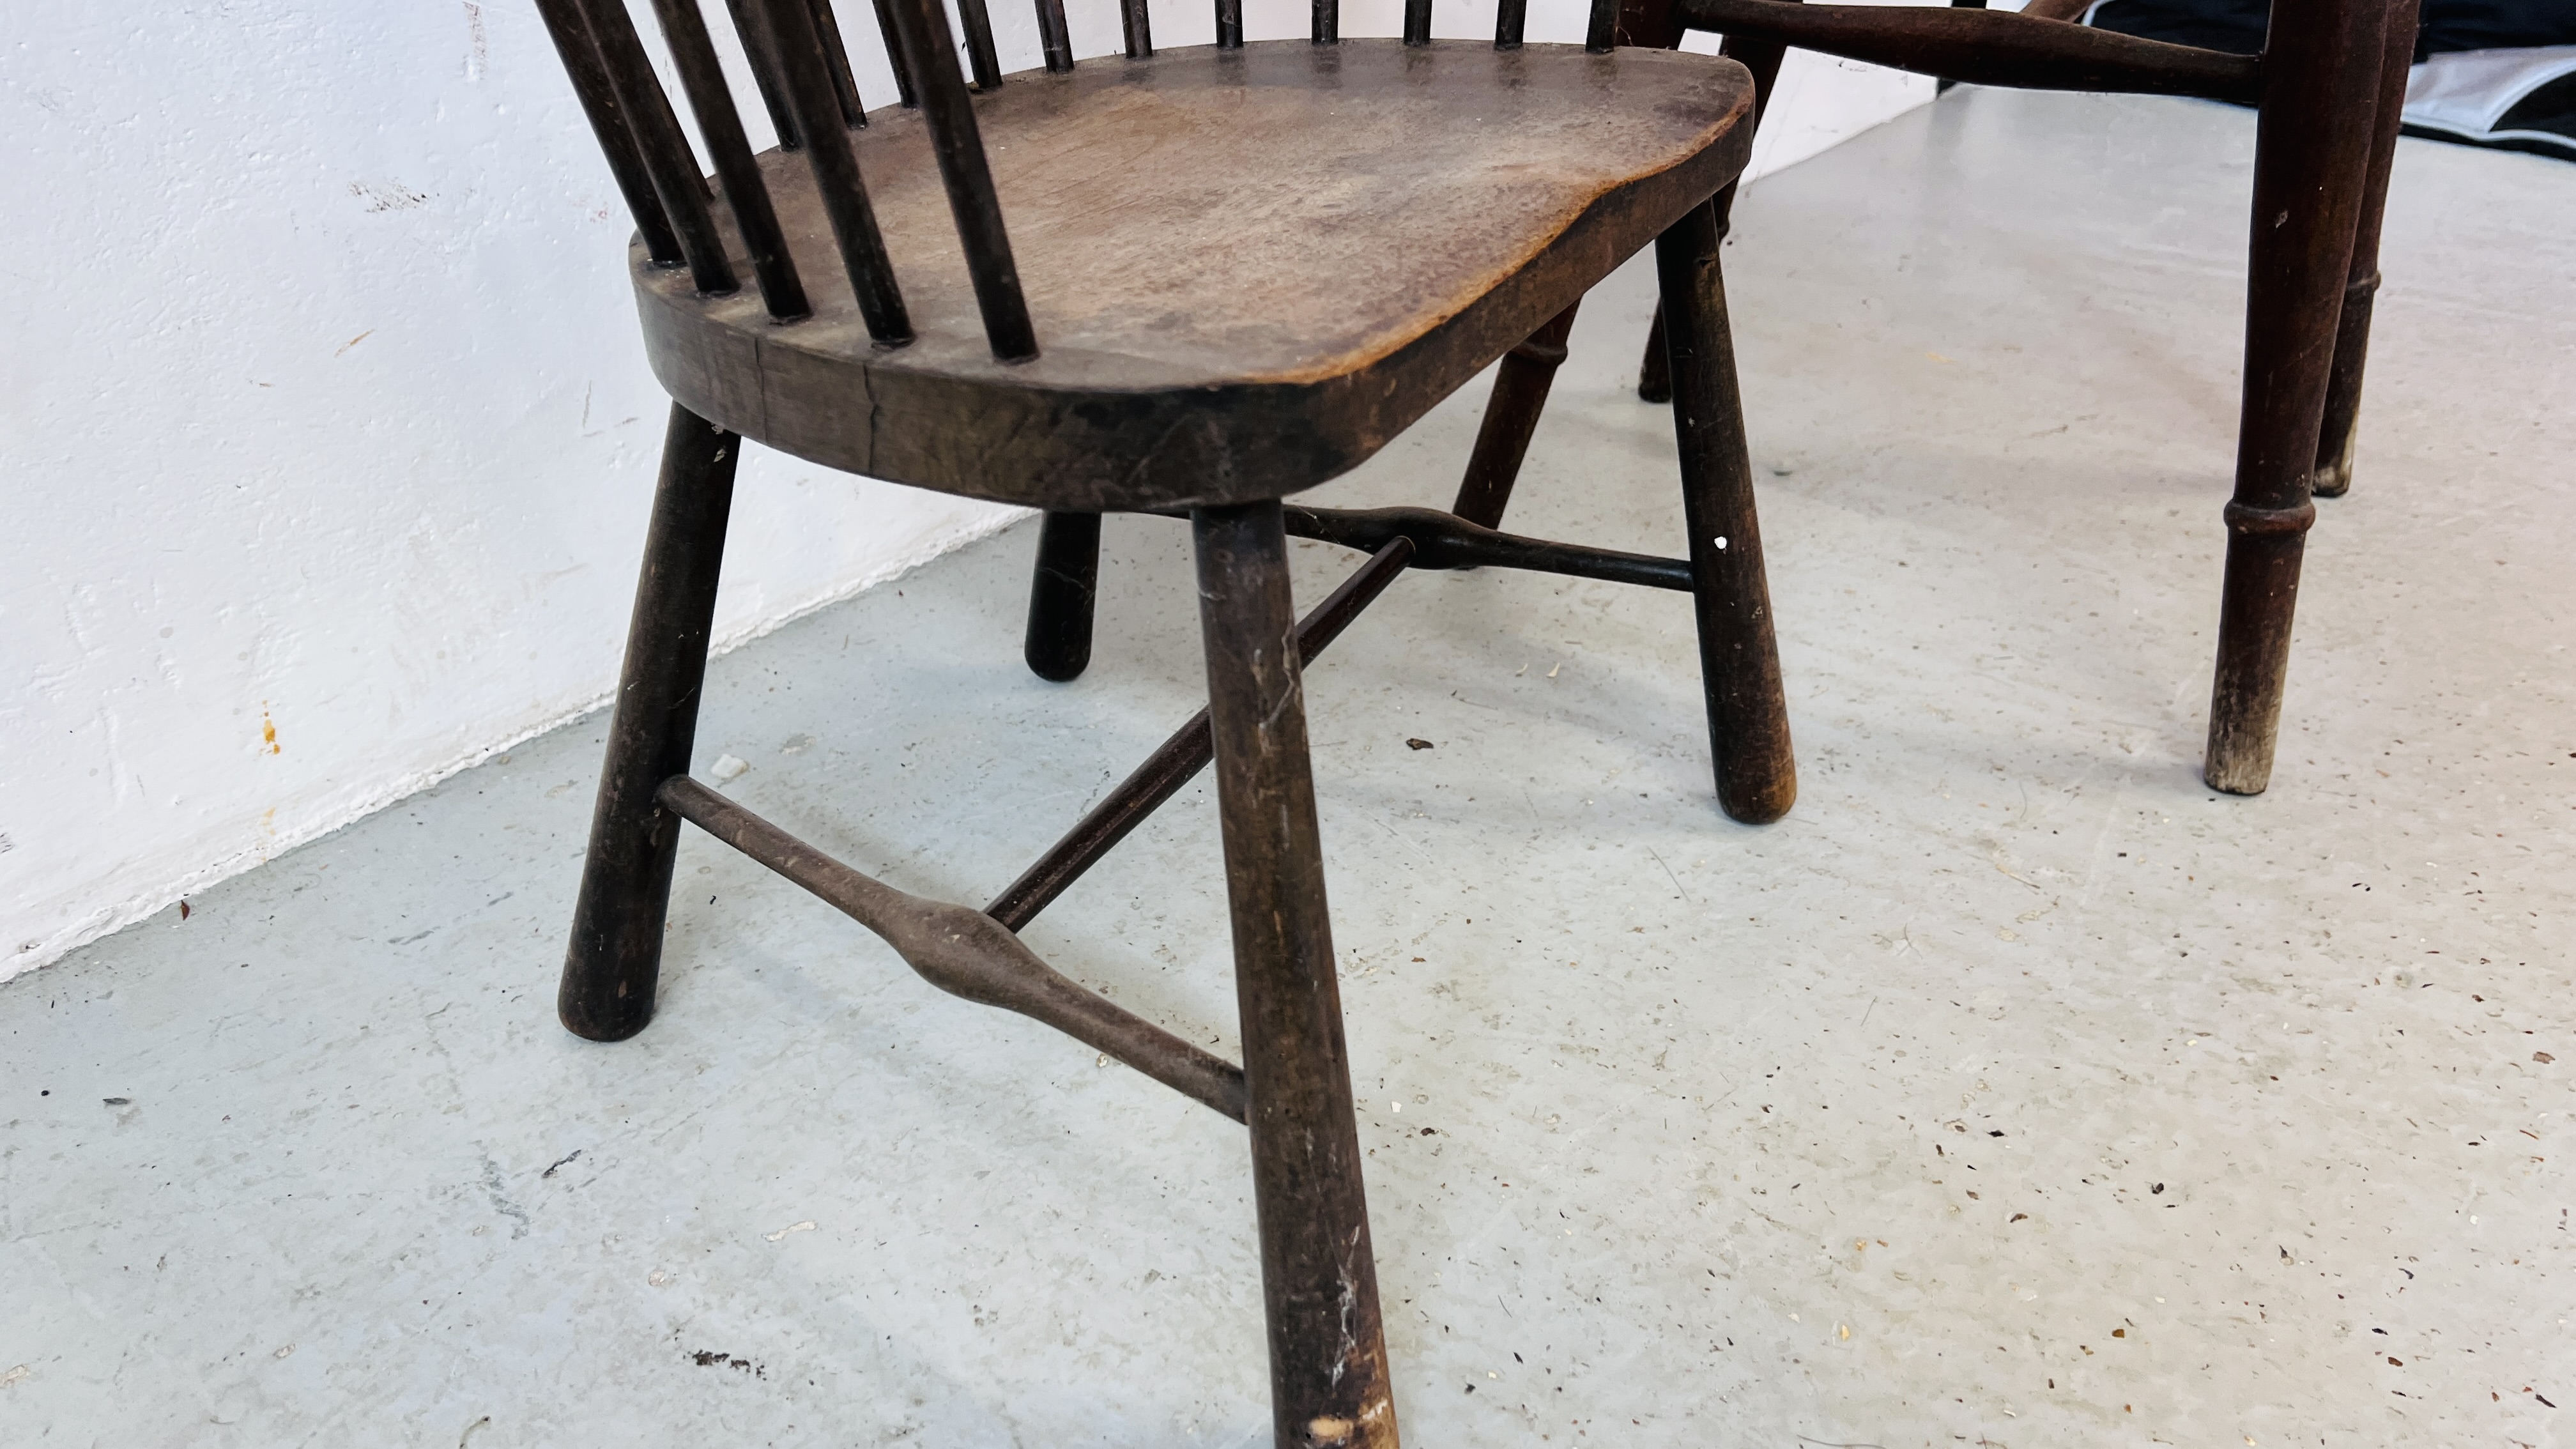 VINTAGE VICTORIAN HARDWOOD HIGHCHAIR ALONG WITH A LIBERTY STYLE CHILD'S CHAIR. - Image 6 of 8